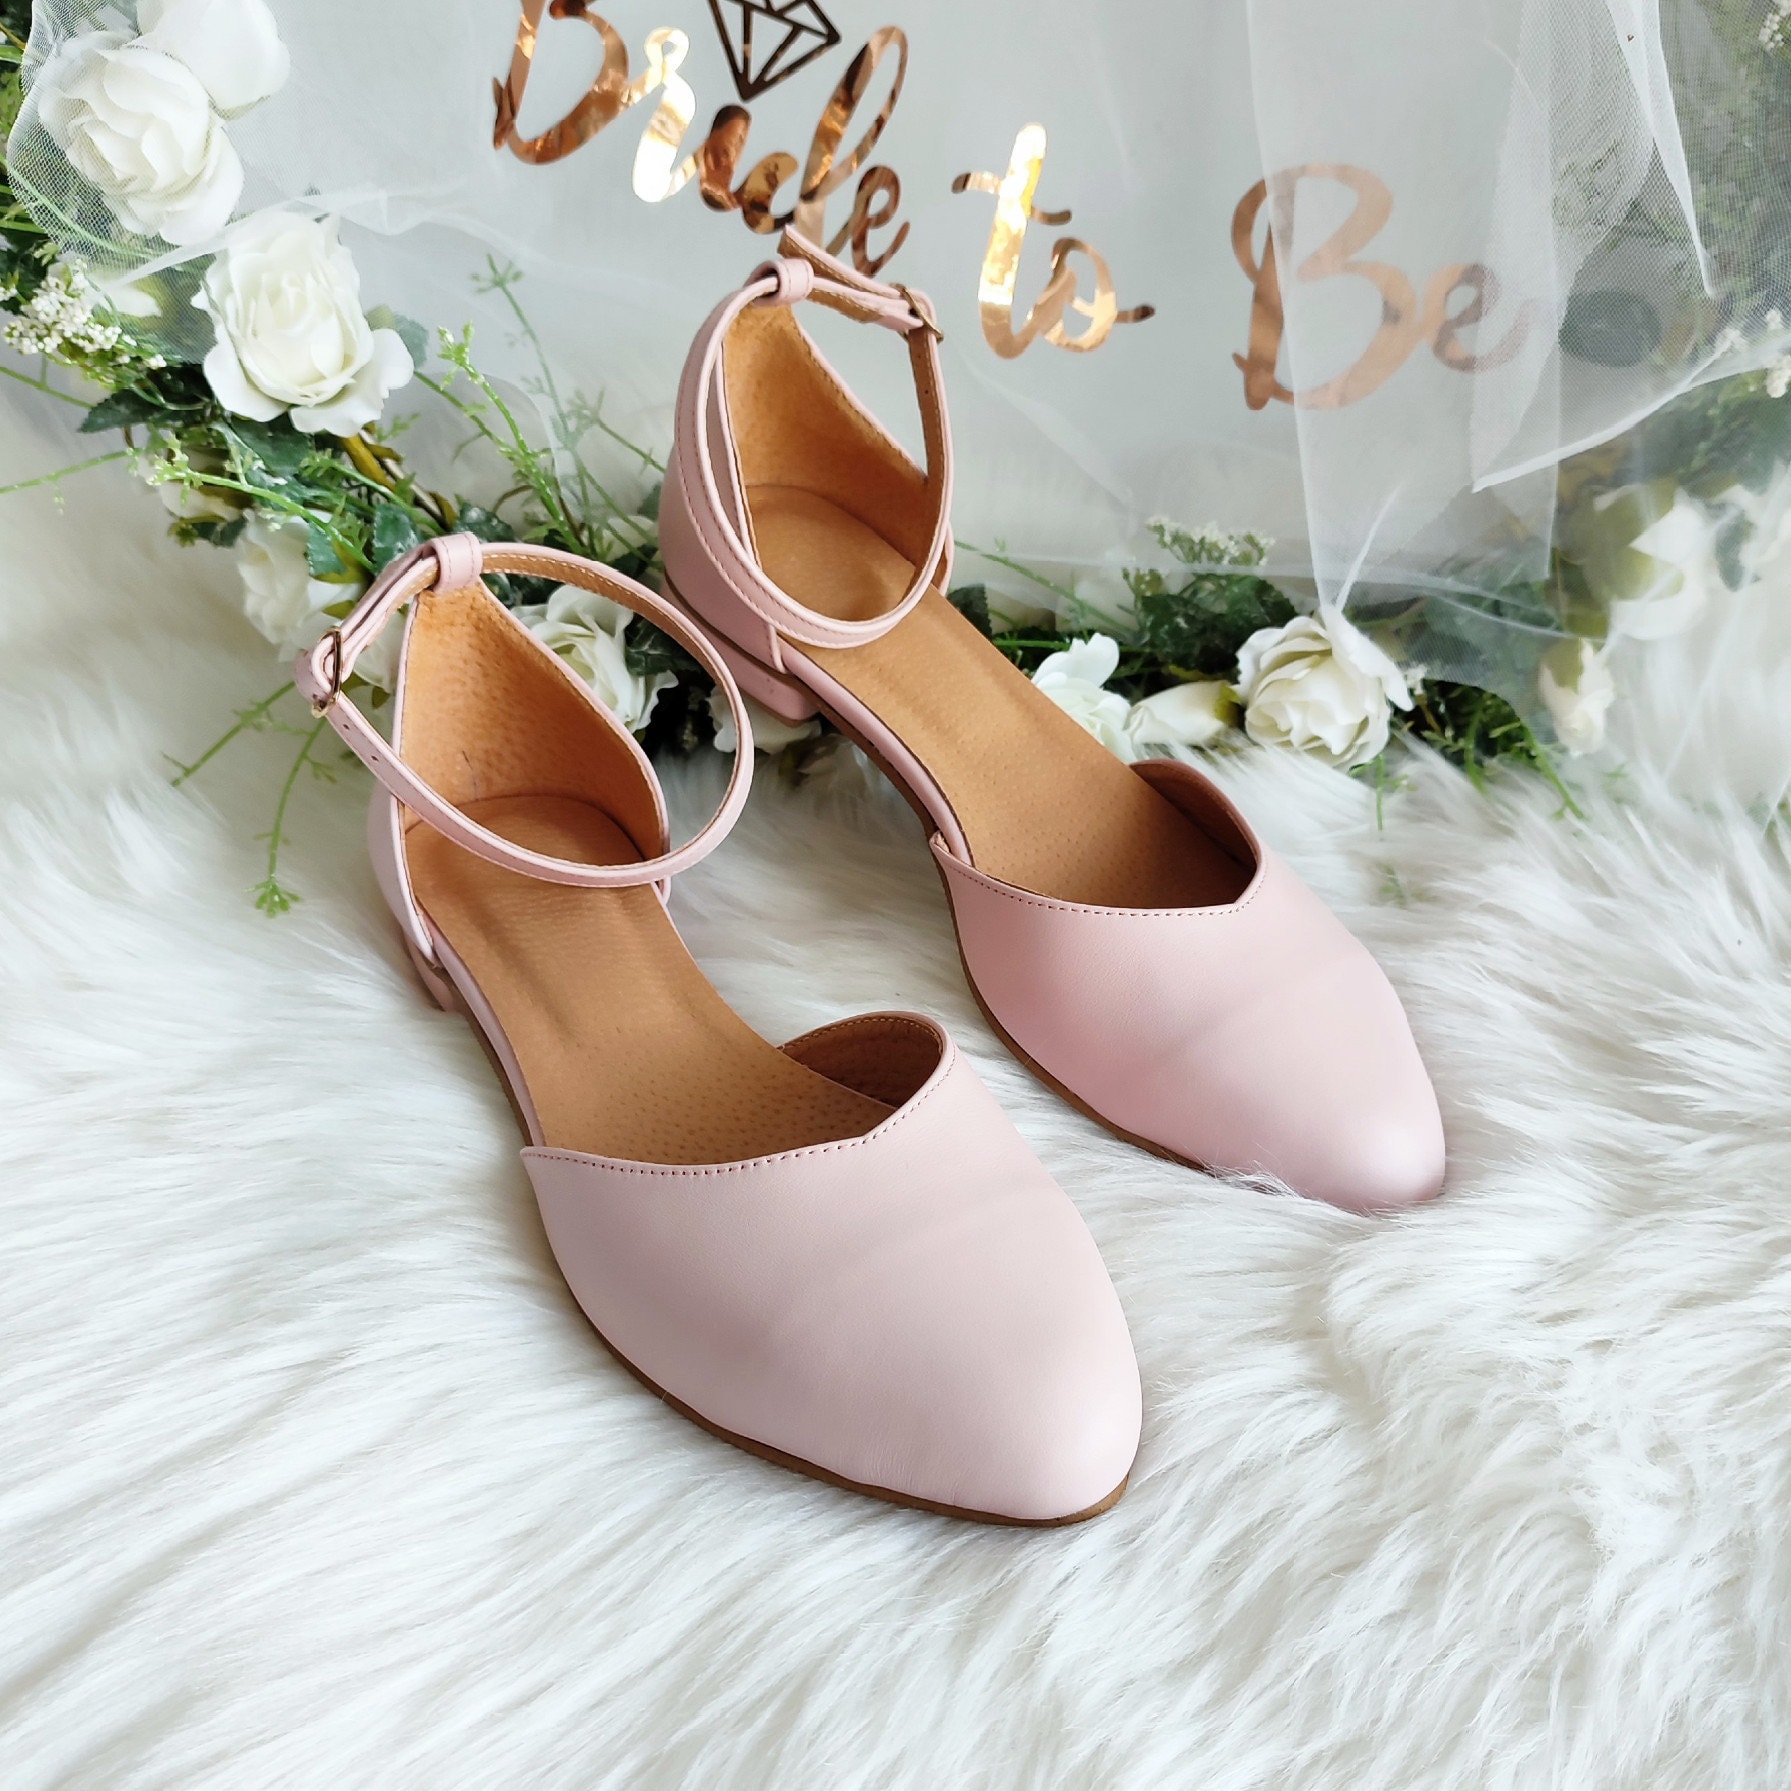 Women's Closed-toe Sandals, Pointy Toe Shoes, V Cut Front, Black Suede Flat  Shoes, Ankle Strap Ballerinas Shoes, High-quality Stylish Shoes 